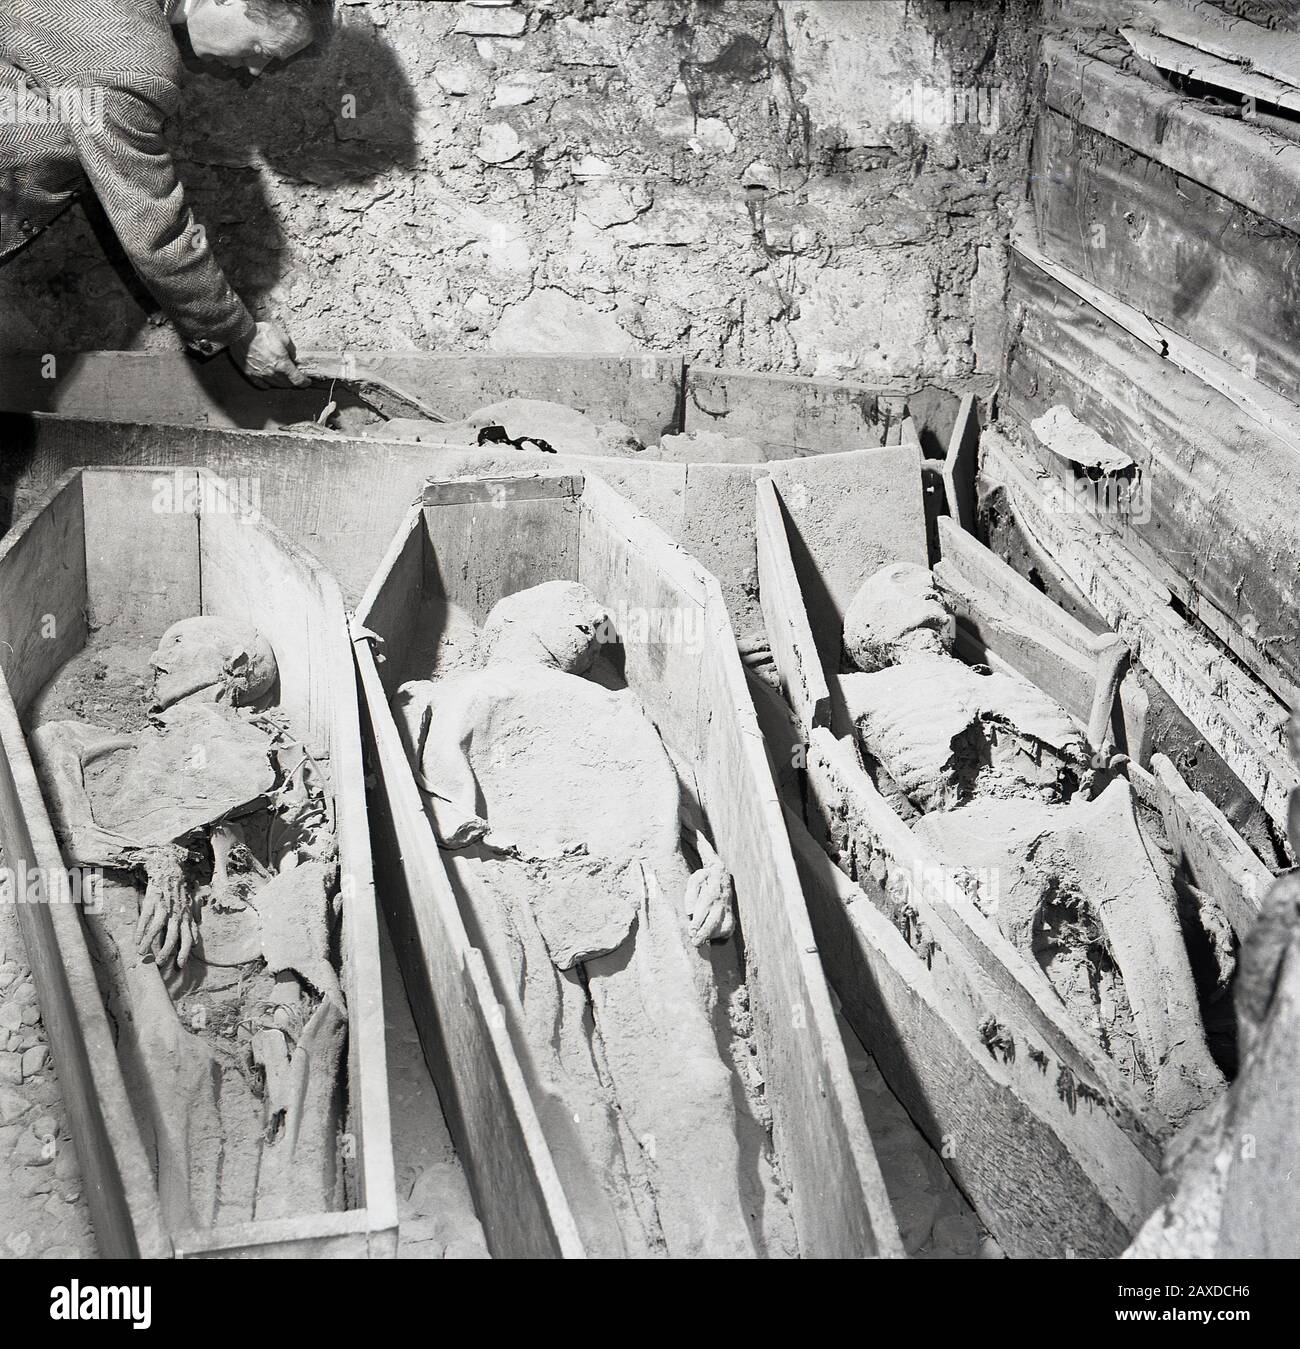 1950s, historical, burial site....a man looking at old dead bodies in open wooden coffins, Ireland. Stock Photo